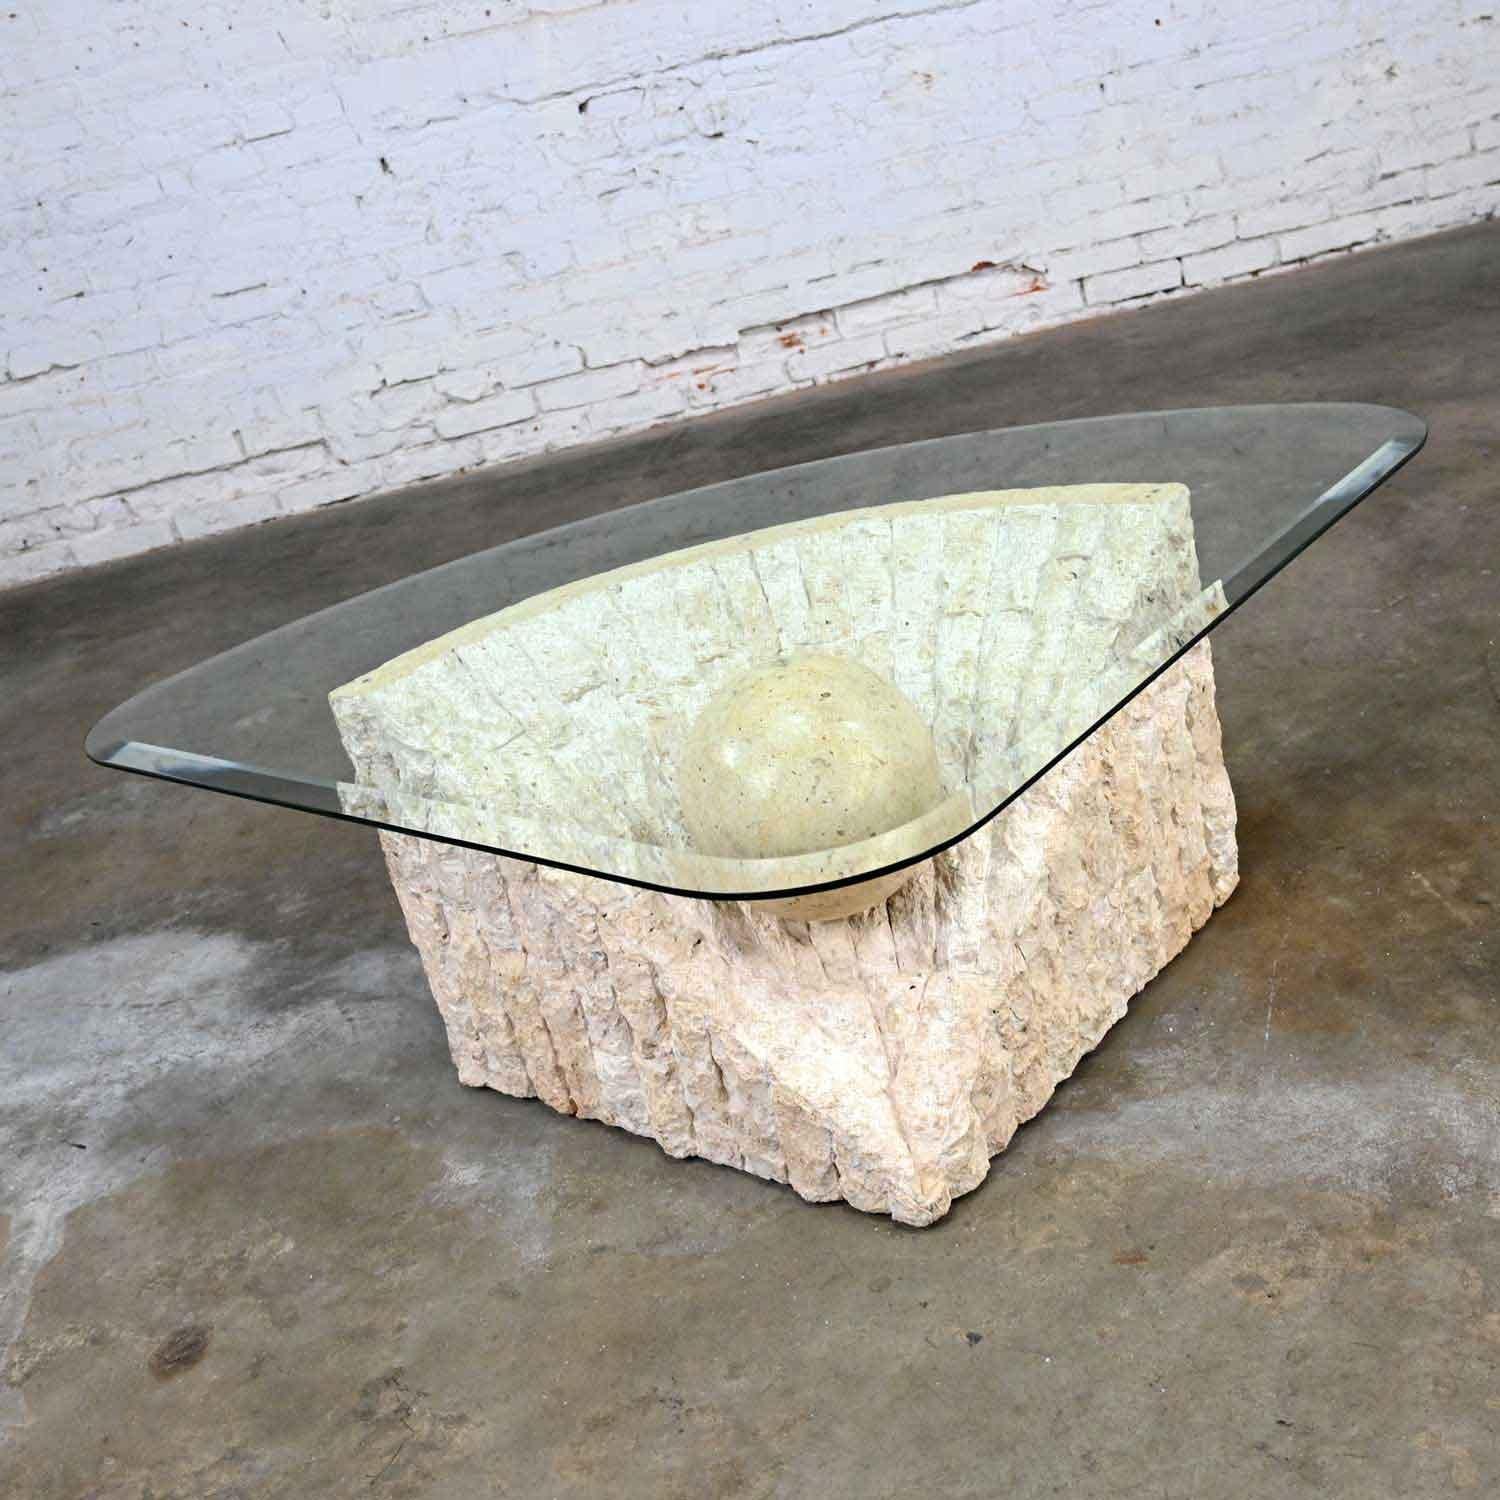 Magnificent postmodern tessellated Mactan coffee table with rough edge stone triangular base and triangular glass top with a large, polished sphere in the style of Maitland Smith. Beautiful condition, keeping in mind that this is vintage and not new